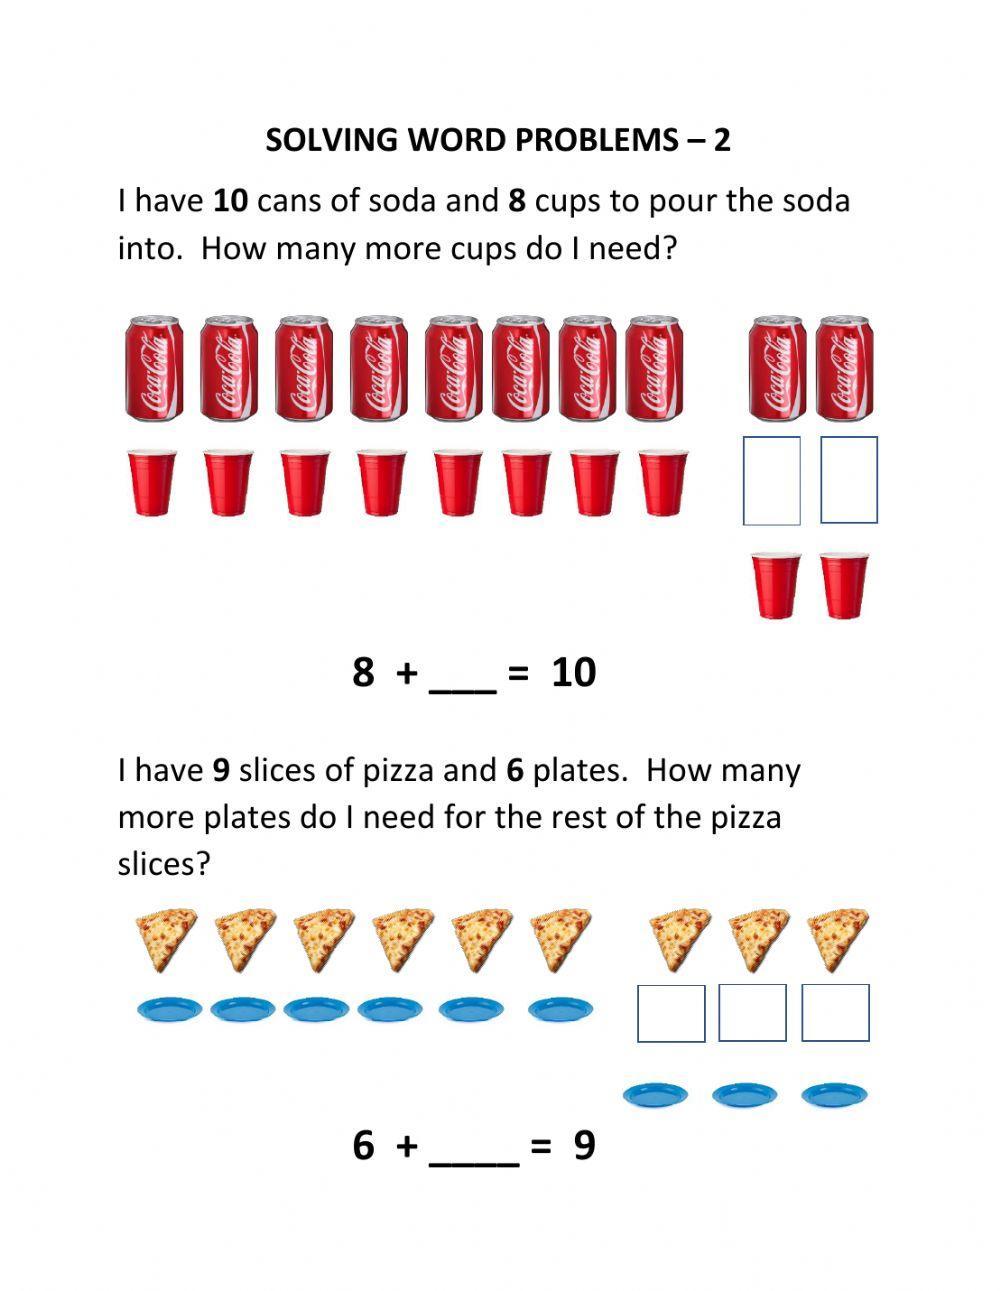 Solving Word Problems - 2